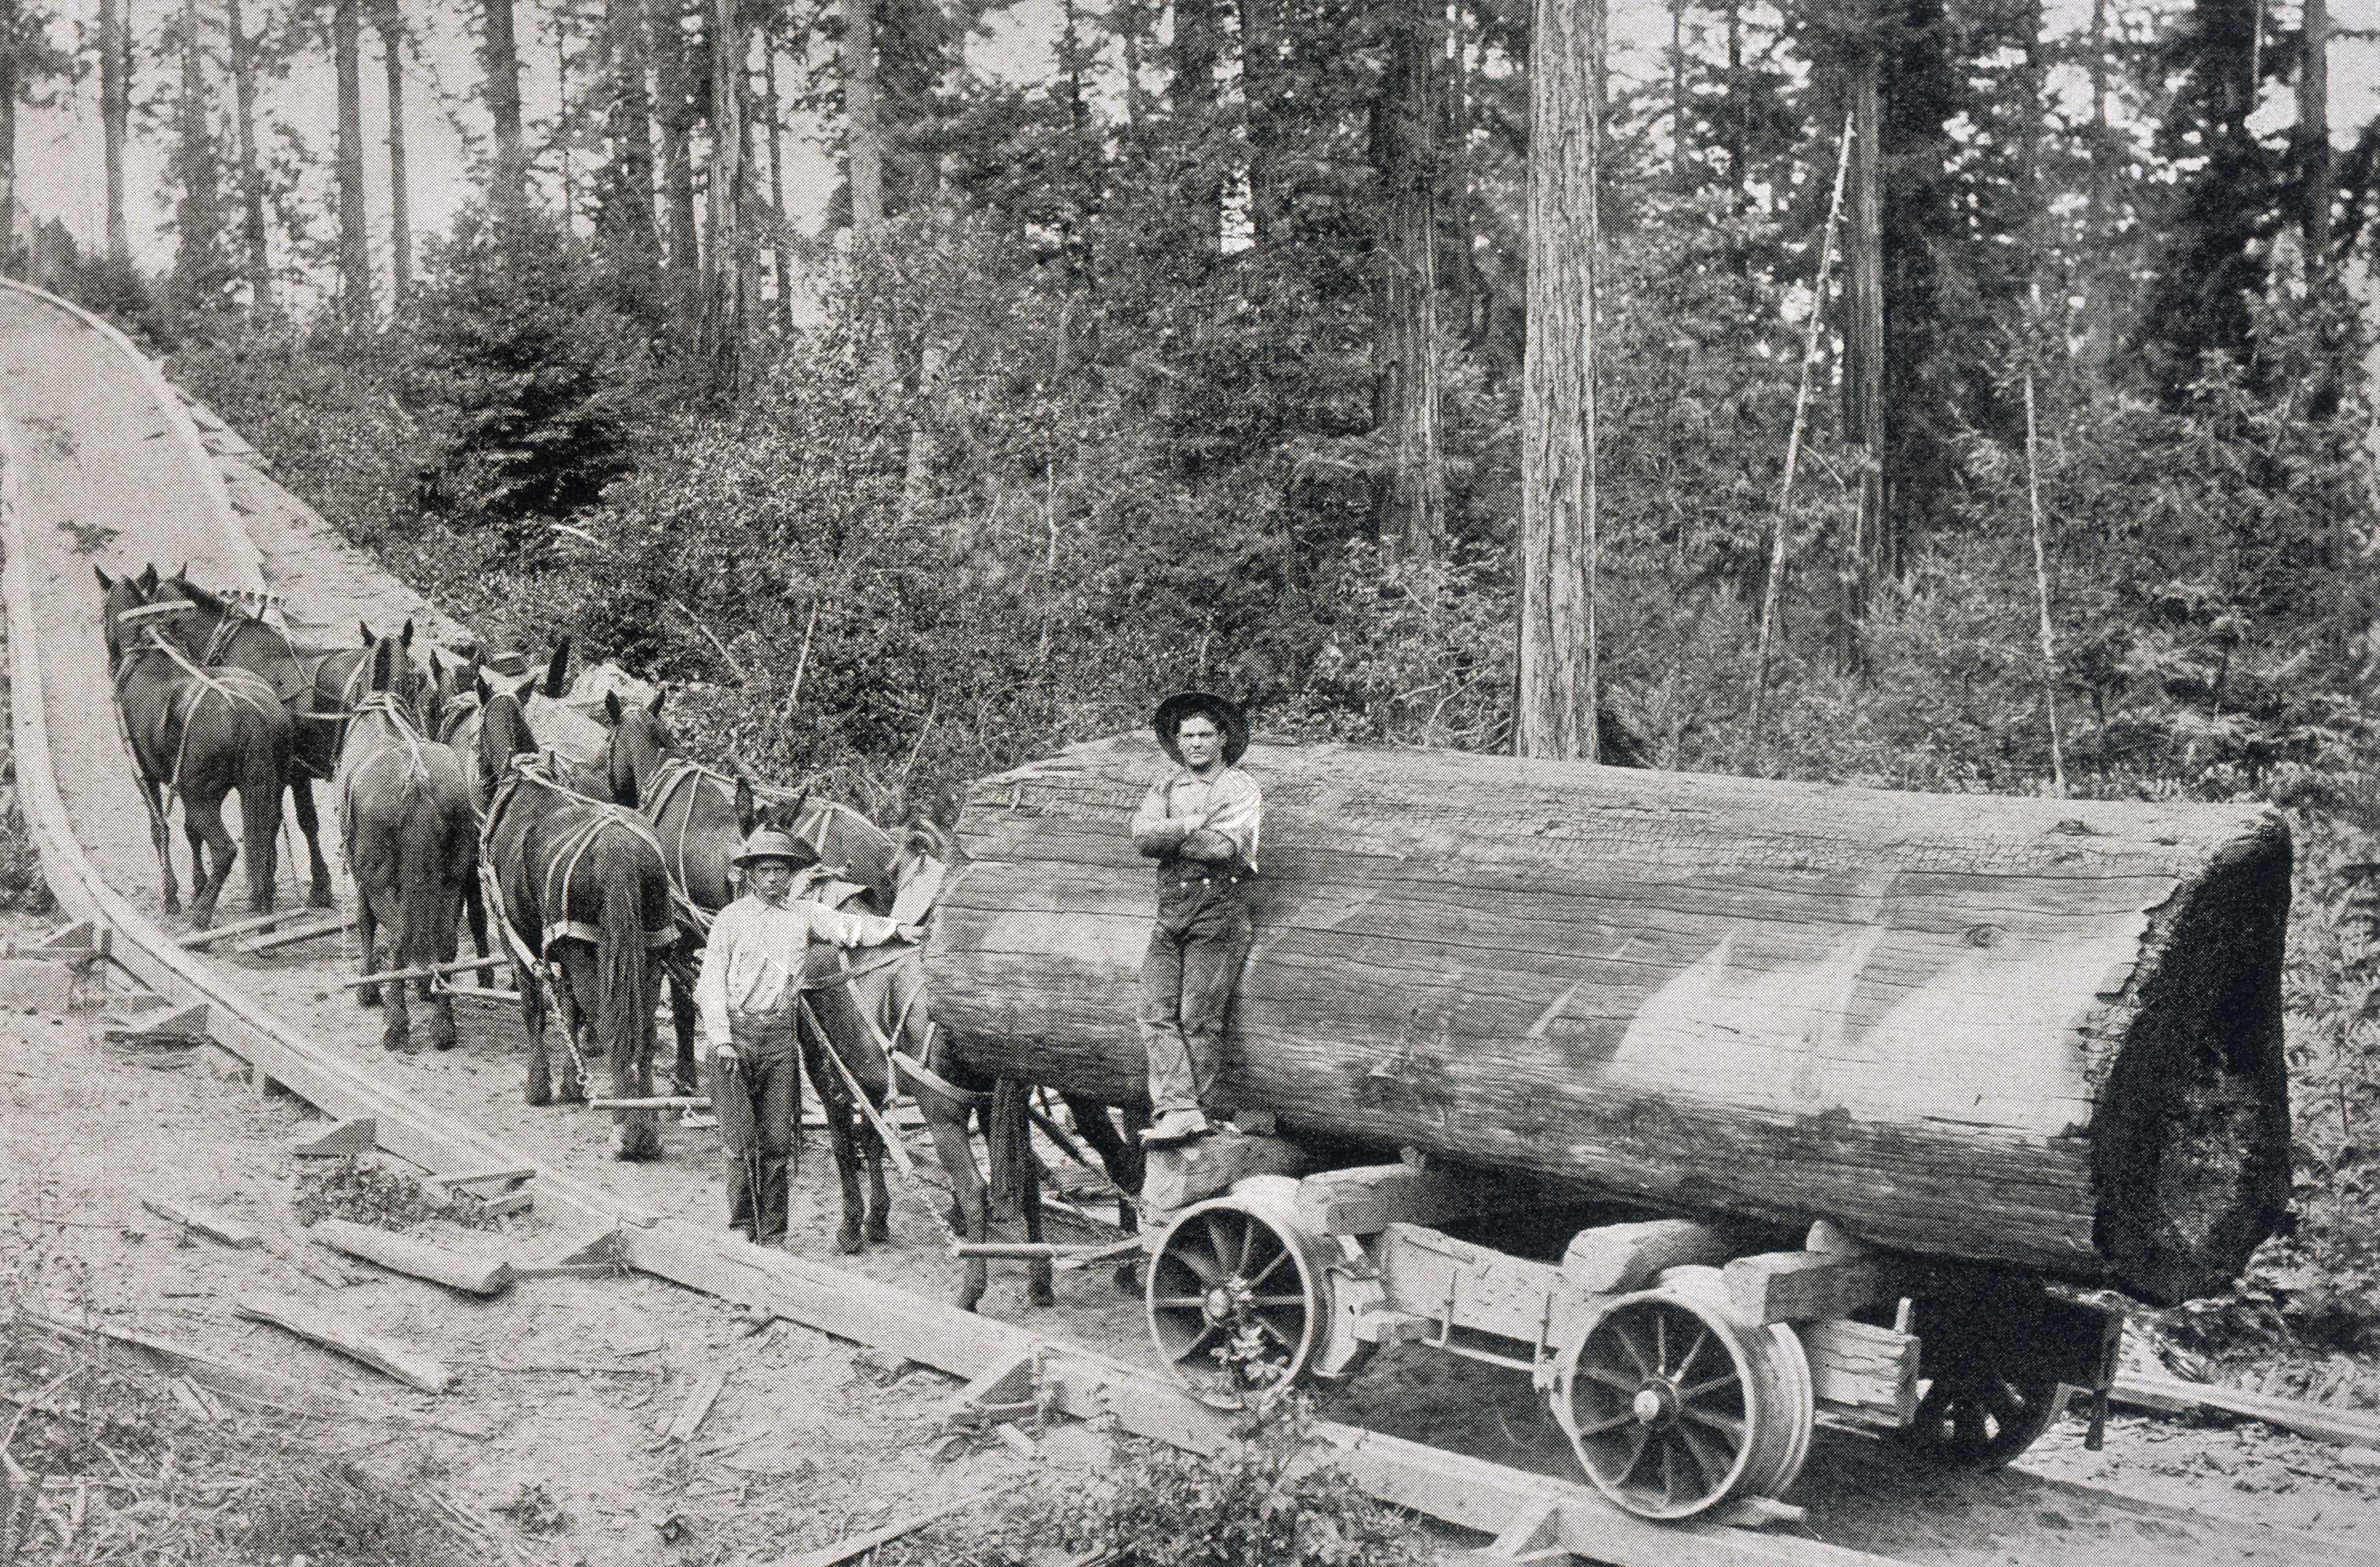 Two men using a cart to transport a log